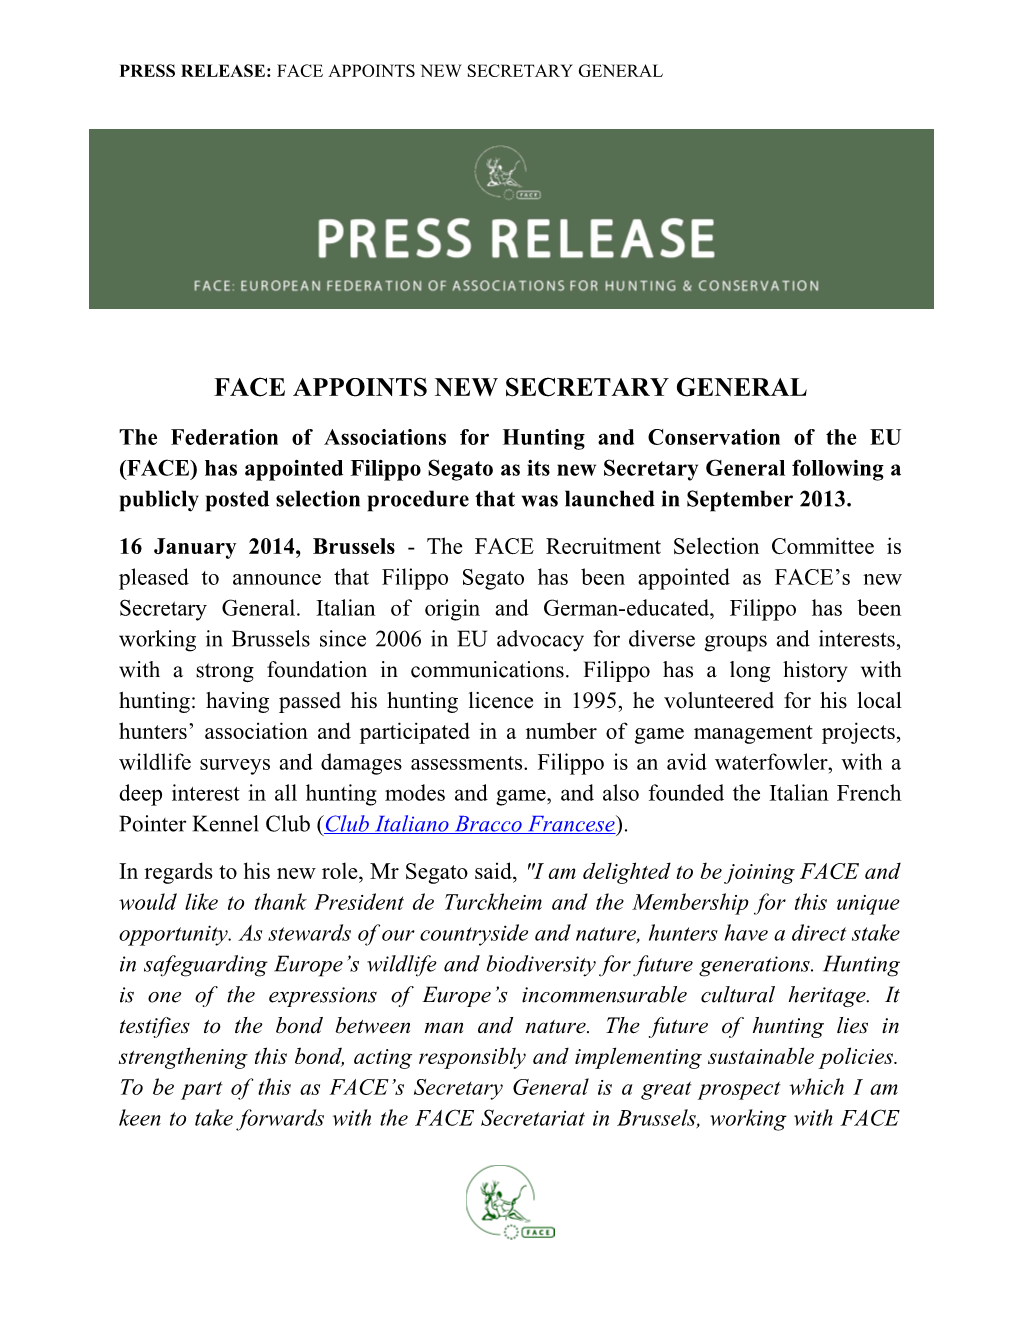 Press Release:Face Appoints New Secretary General